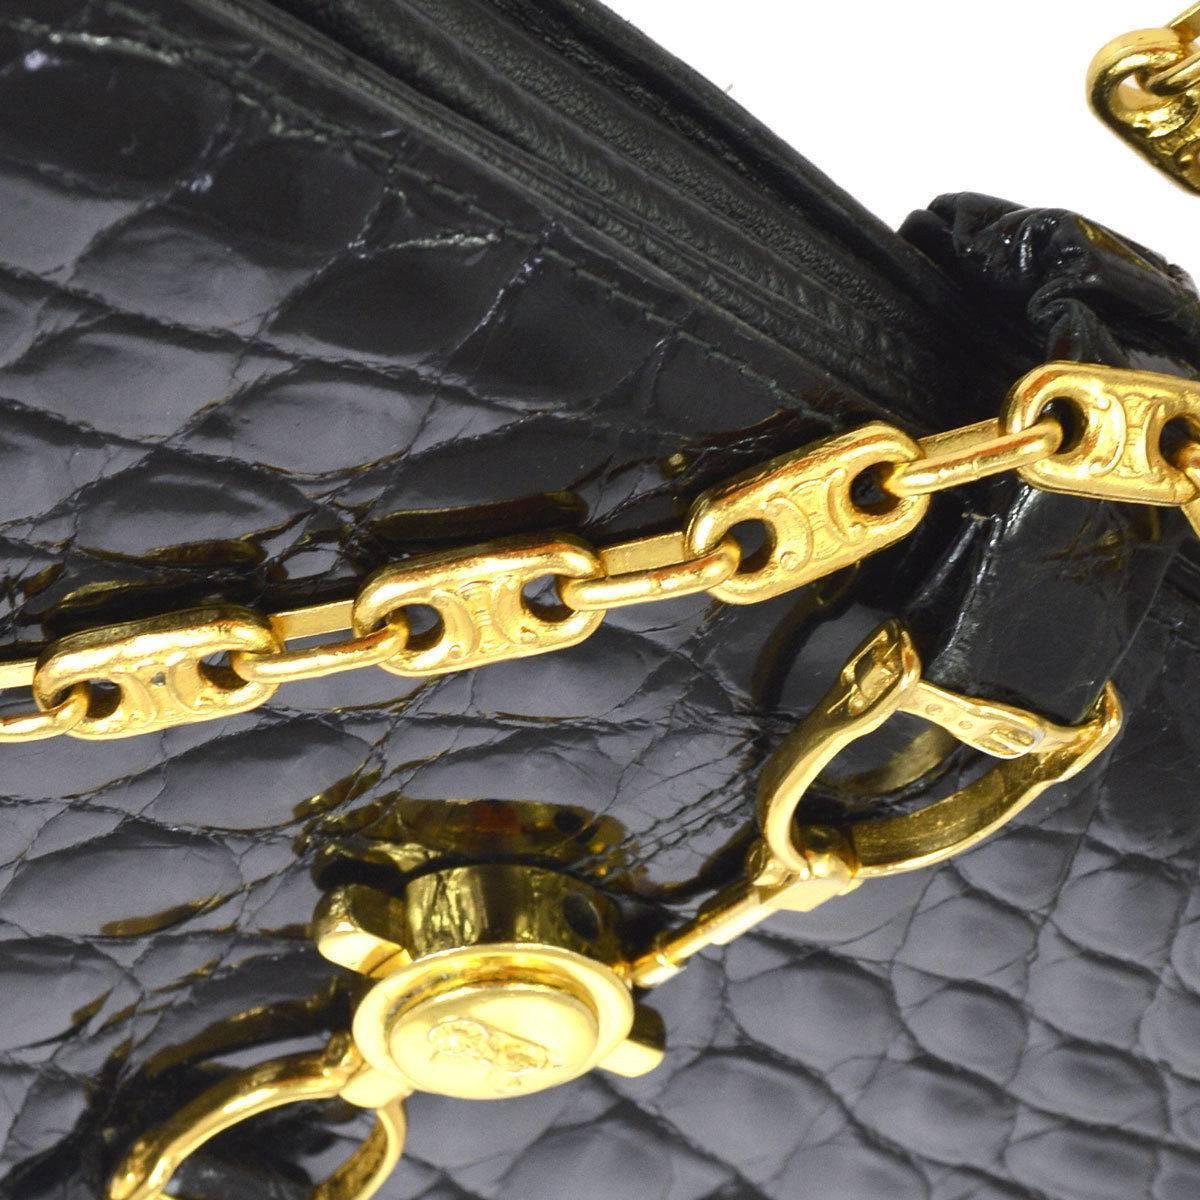 Celine Black Crocodile Leather Gold Evening 2 in 1 Clutch Shoulder Flap Bag

Crocodile leather
Gold tone hardware
Leather lining 
Made in Italy 
Removable shoulder strap drop 12